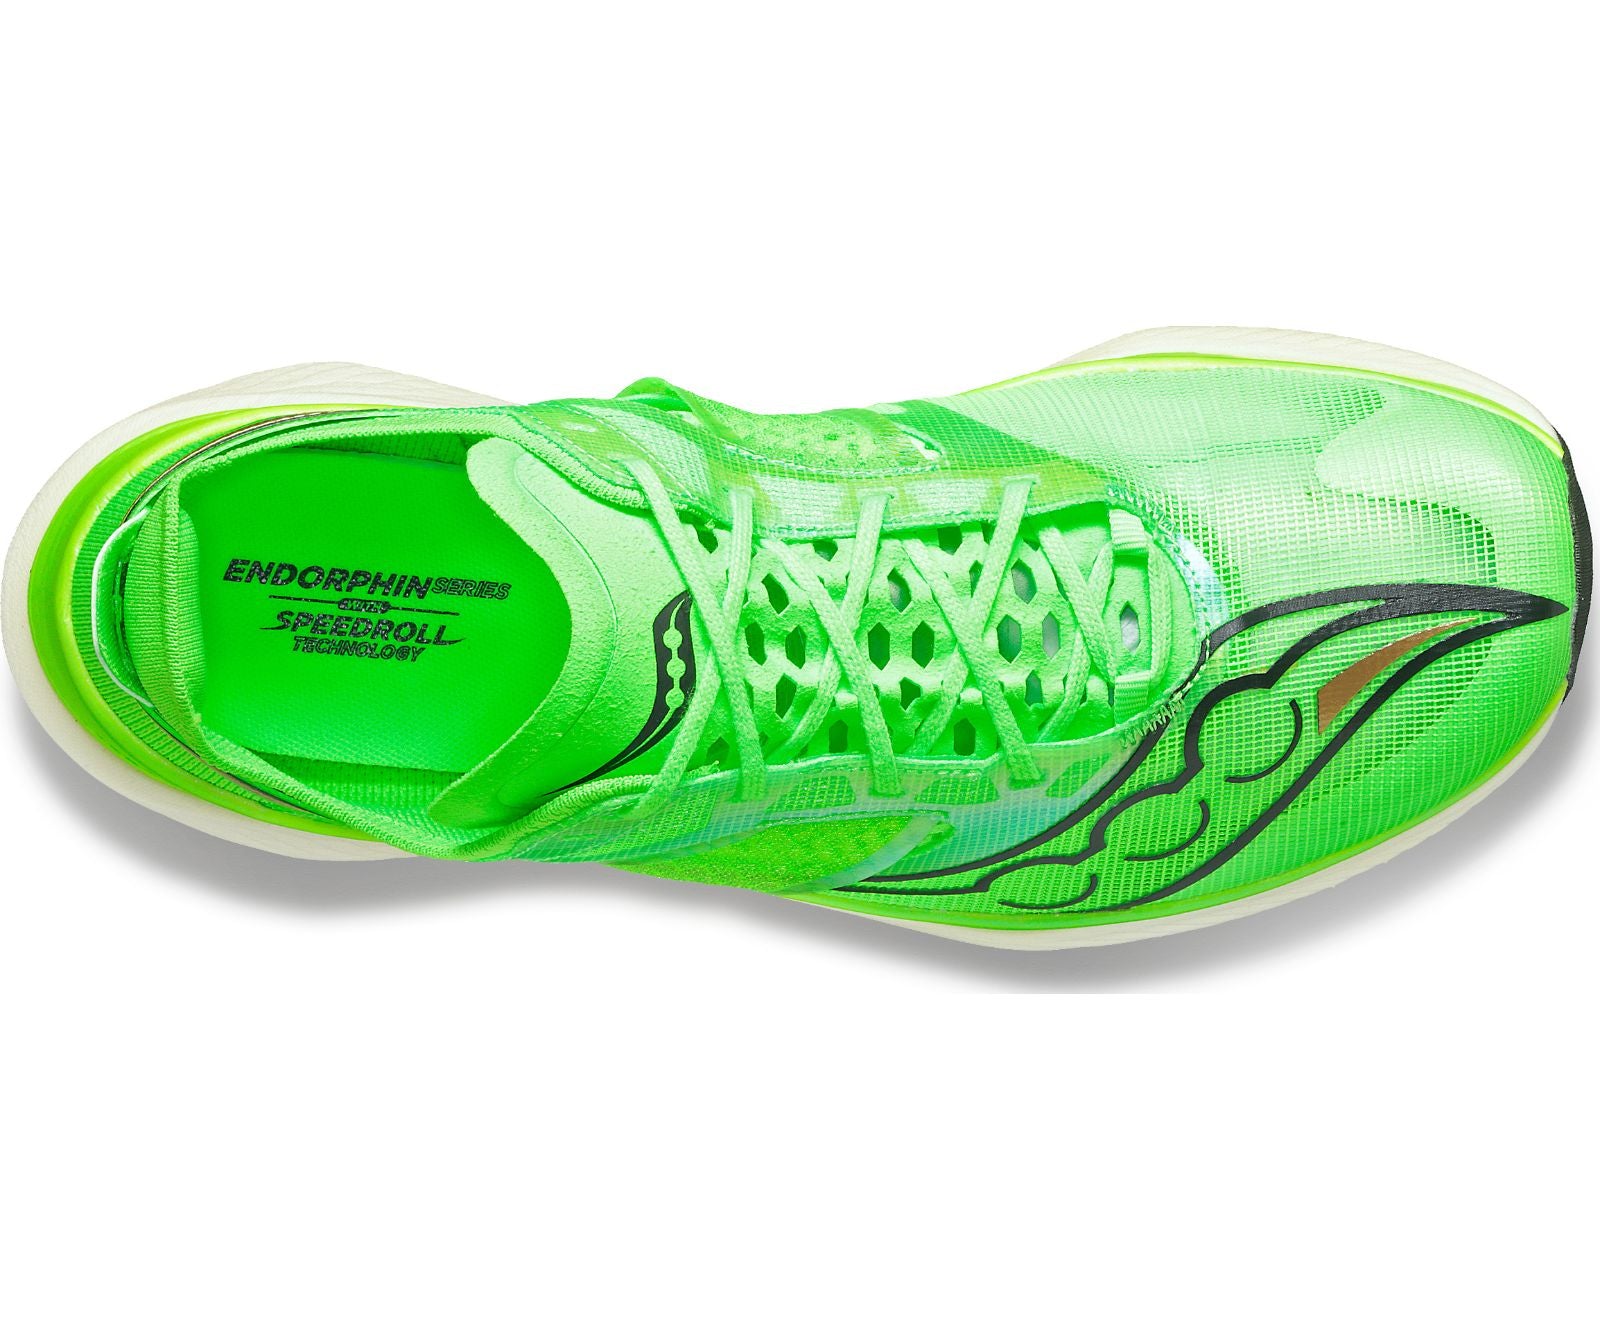 Top view of the Women's Endorphin Elite by Saucony in the color Slime